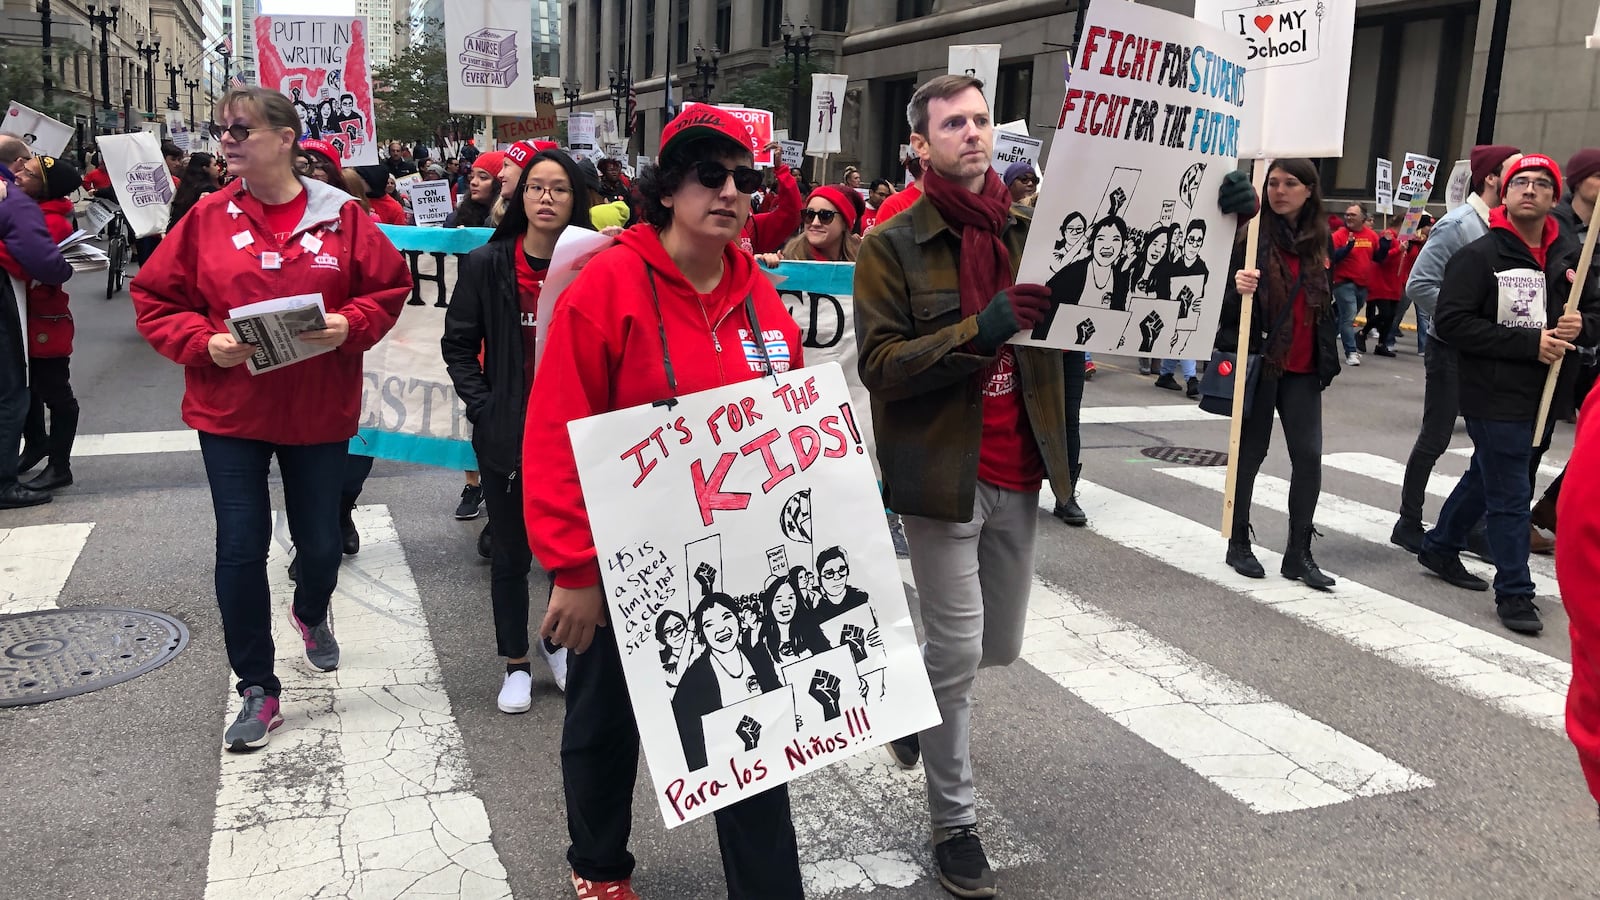 Protesters rallied downtown on Oct. 17, 2019, the first day of the strike by teachers and support staff against Chicago Public Schools.